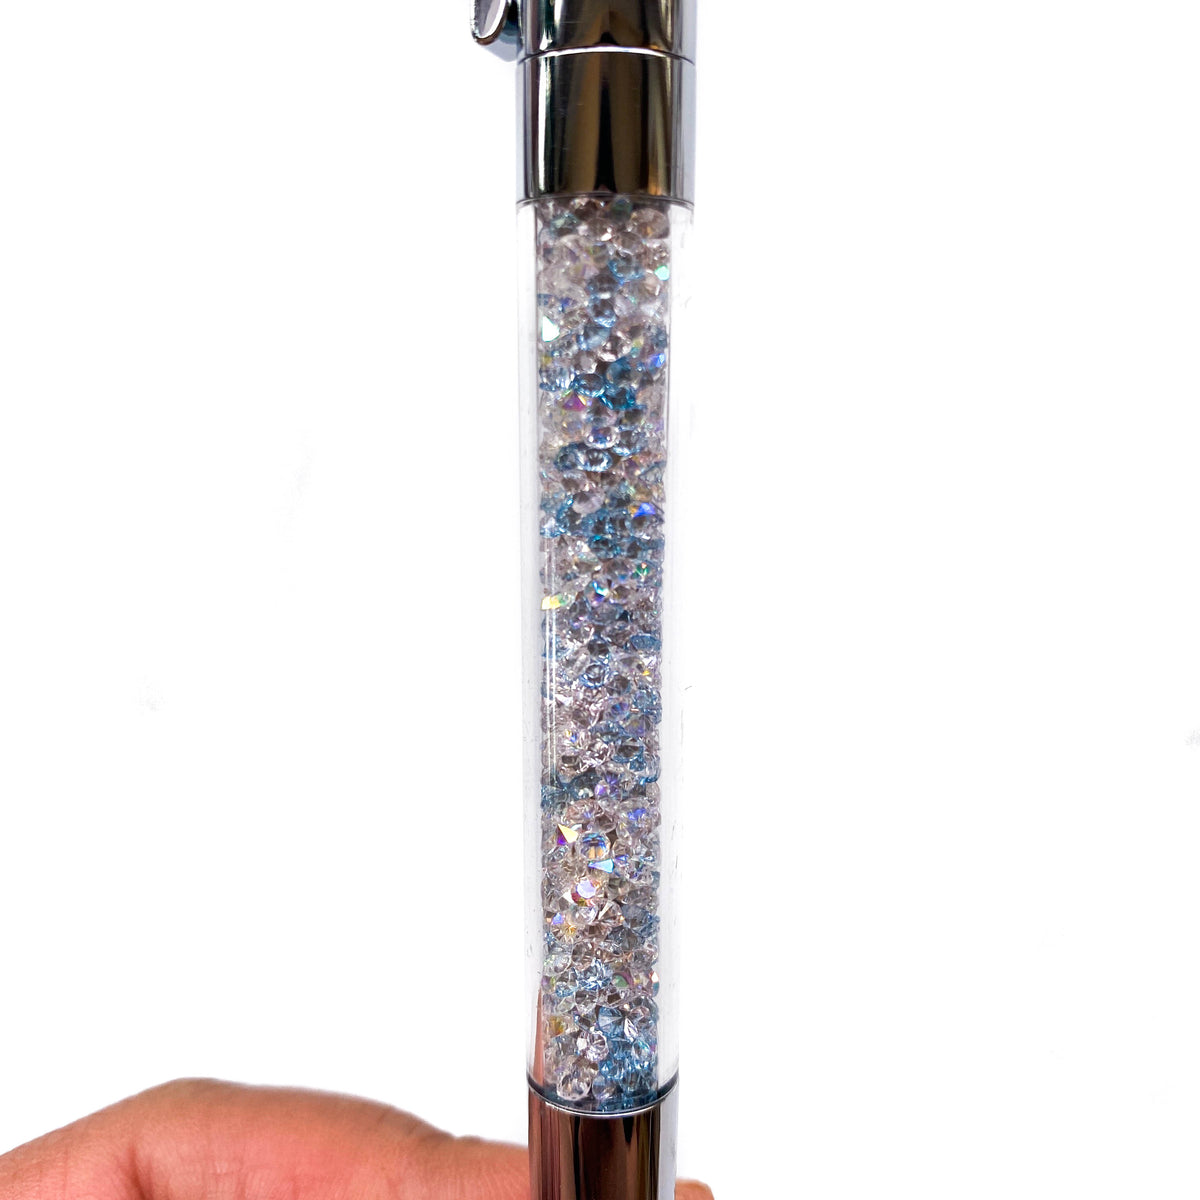 Be Well Crystal VBPen | limited kit pen